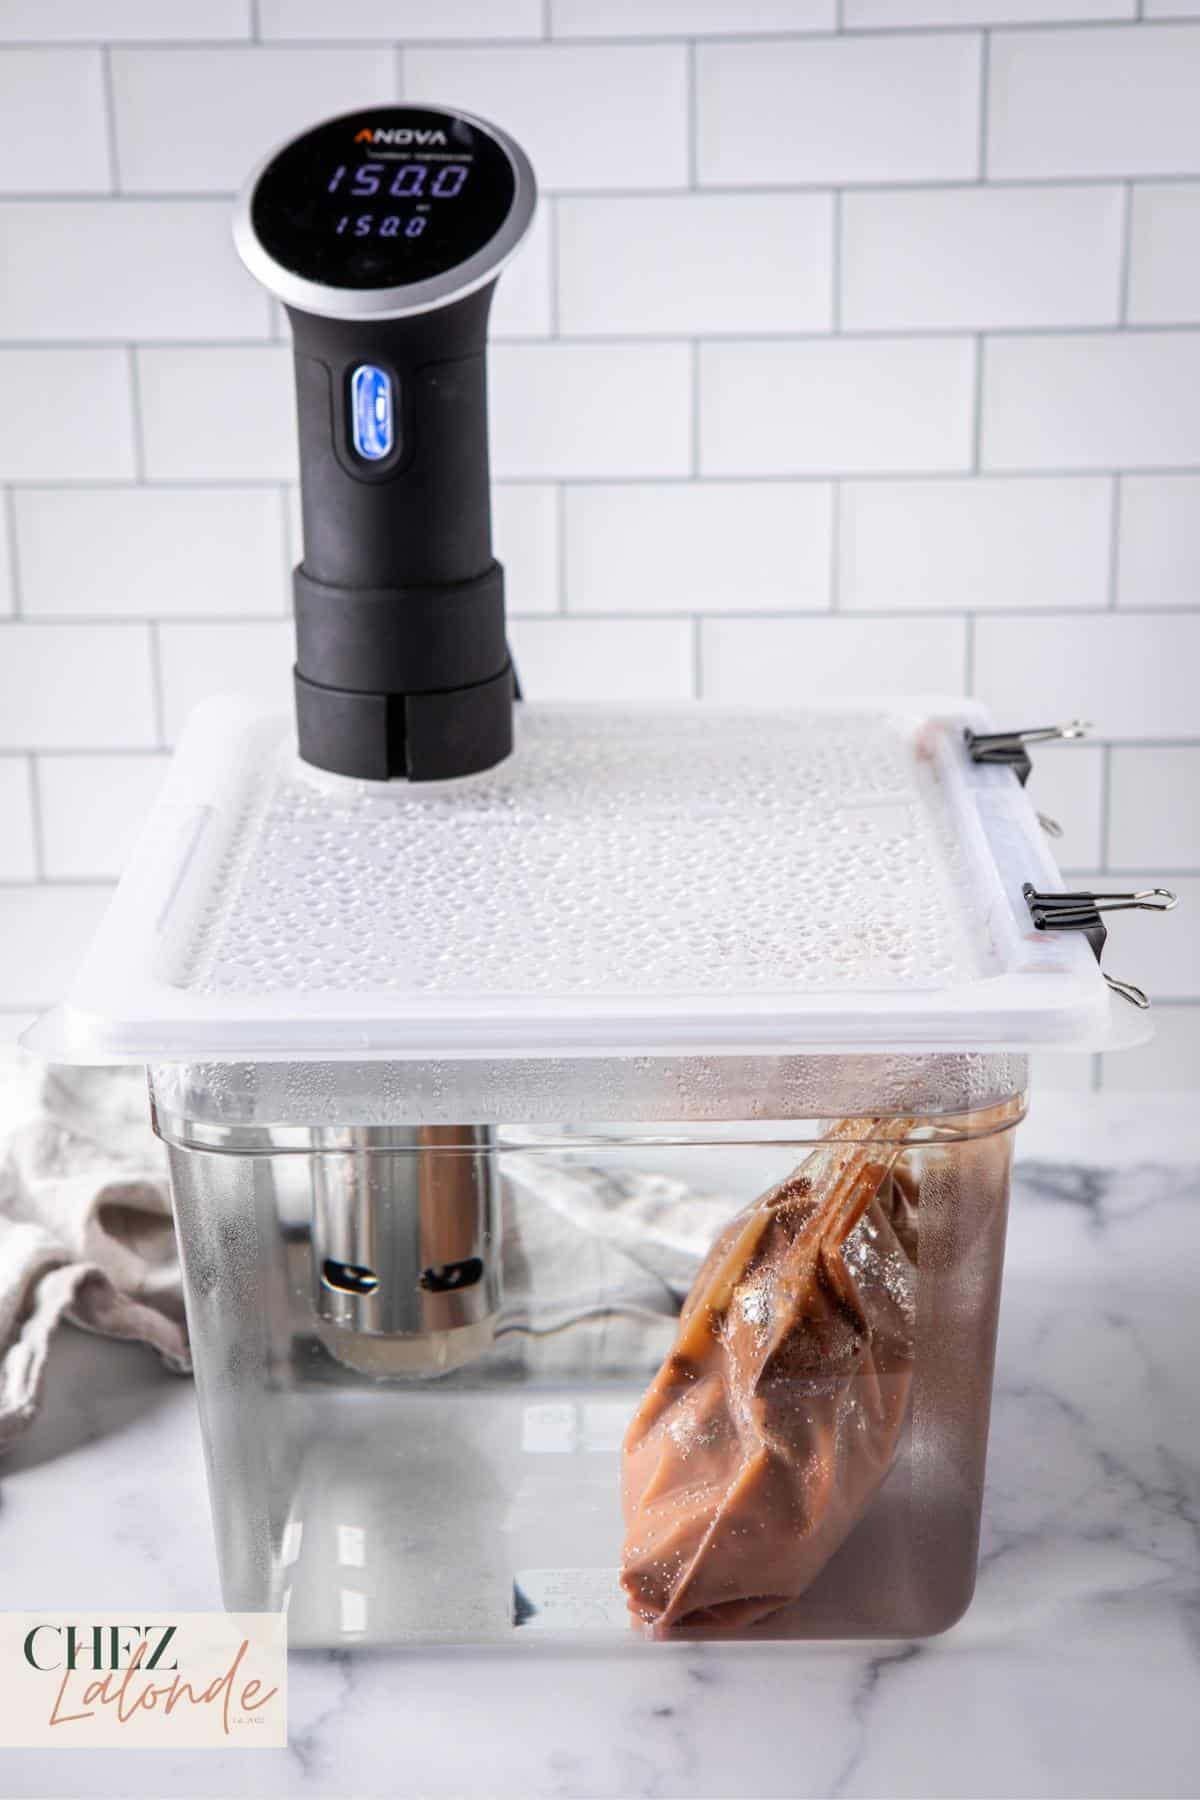 Clip the bag to the container's side, and Sous Vide cooking for at least 4 but no longer than 6 hours.